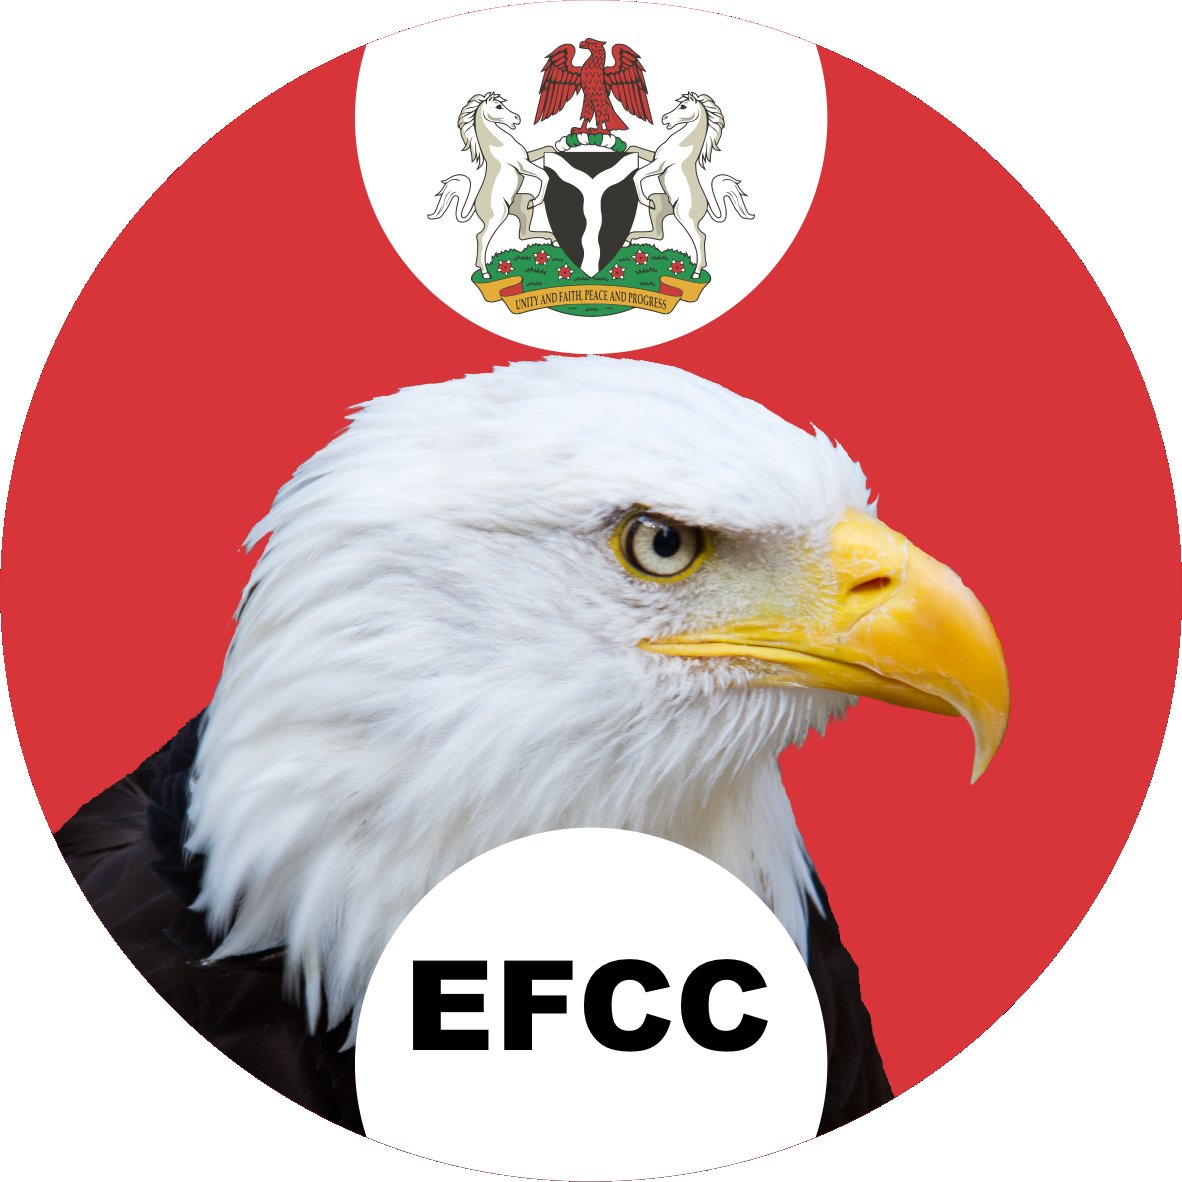 EFCC PRESS STATEMENT Setting the Records Straight on Investigations of Humanitarian Ministry The Economic and Financial Crimes Commission, EFCC, has noticed the rising tide of commentaries, opinions, assumptions and insinuations concerning its progressive investigations into